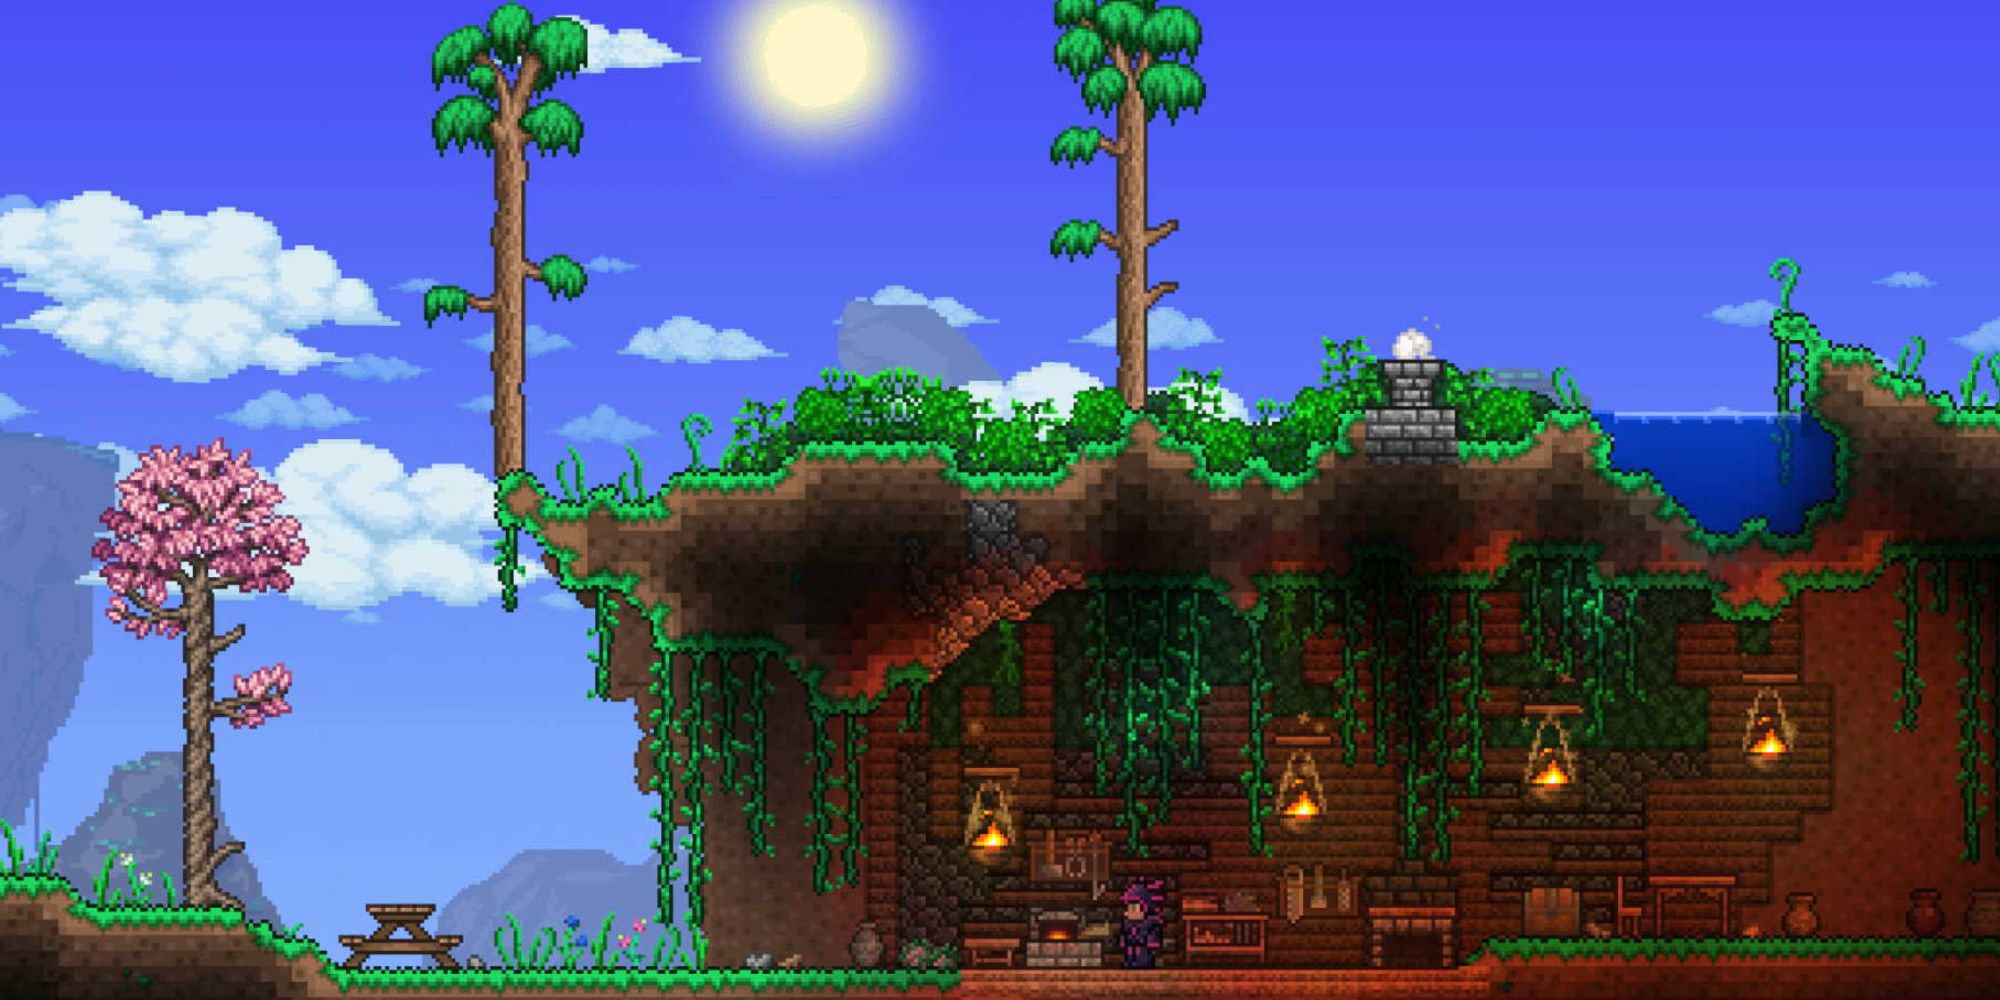 A House built into a side of a cave in Terraria